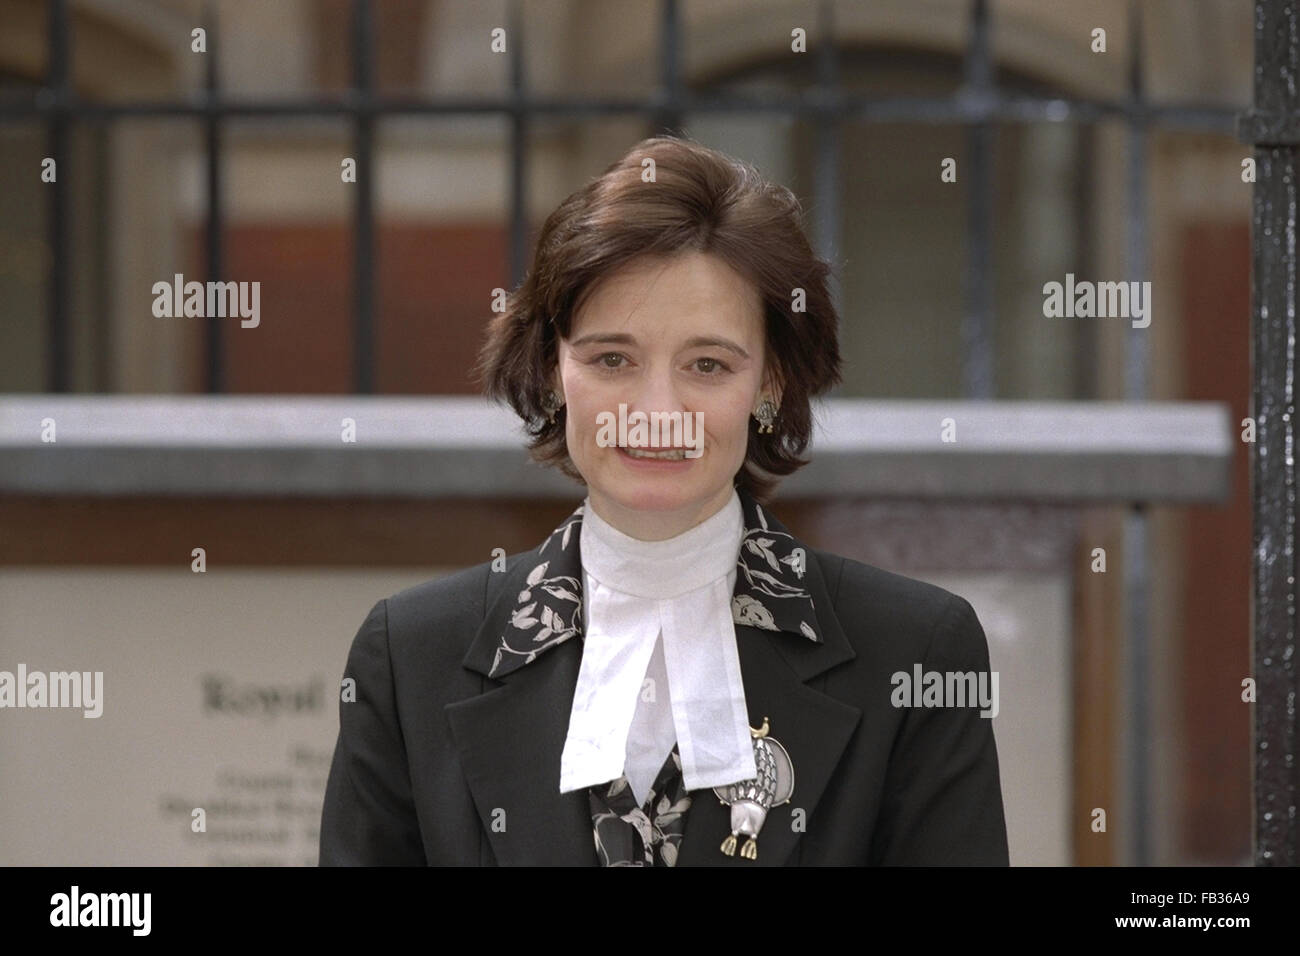 Cherie Blair at her first day back at work as a barrister at The Royal Courts of Justice, High Court, London, England, UK since her husband, Tony Blair, was elected Prime Minister. The 42-year-old barrister is determined to carry on with her job whilst her husband governs the country. 08.05.1997 Stock Photo